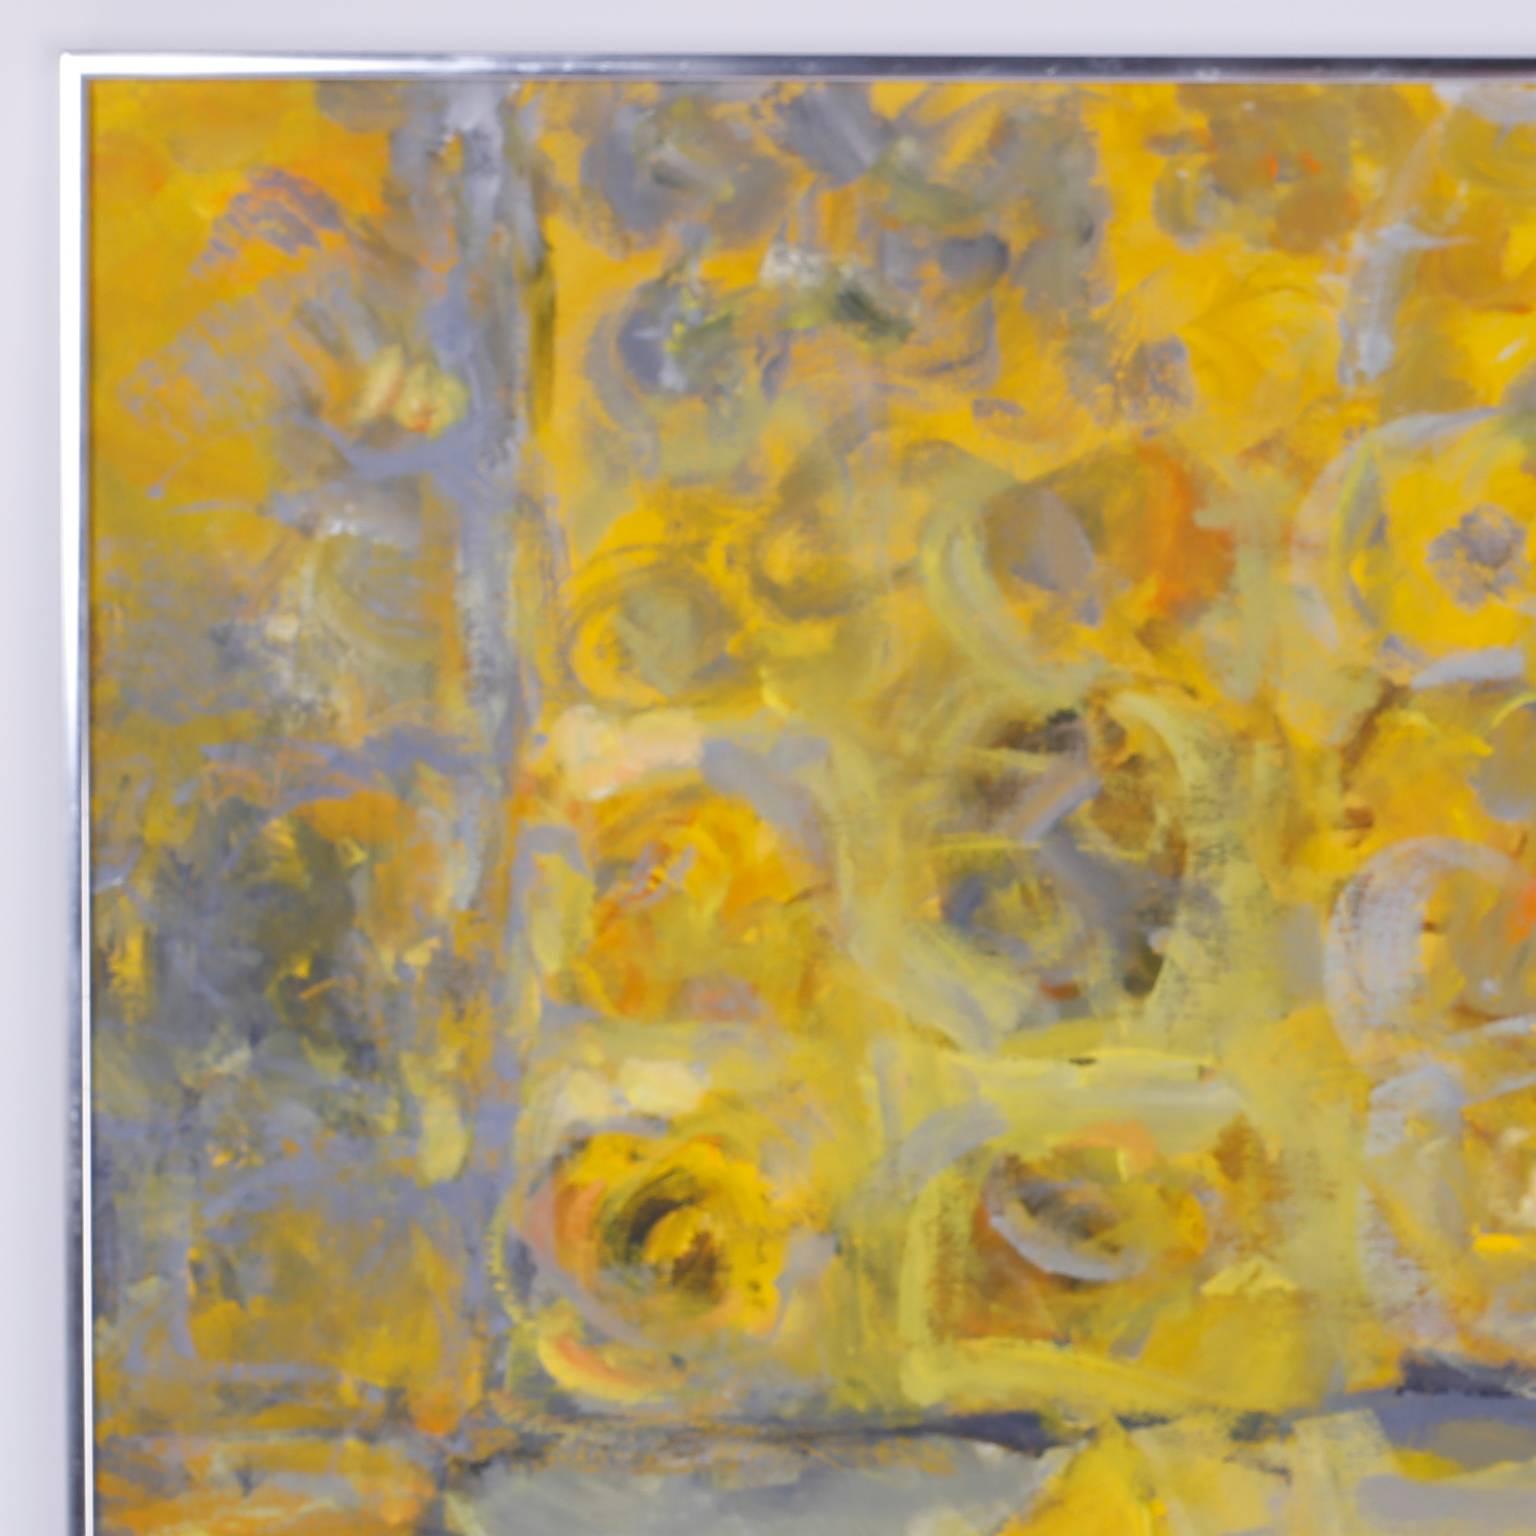 Evocative abstract acrylic painting on canvas that explores the relationship between yellow and grey. Painted with acrylic on canvas in 1973 by Bonnie Lewton, titled on the back yellow still life. Interesting note, this painting participated in a